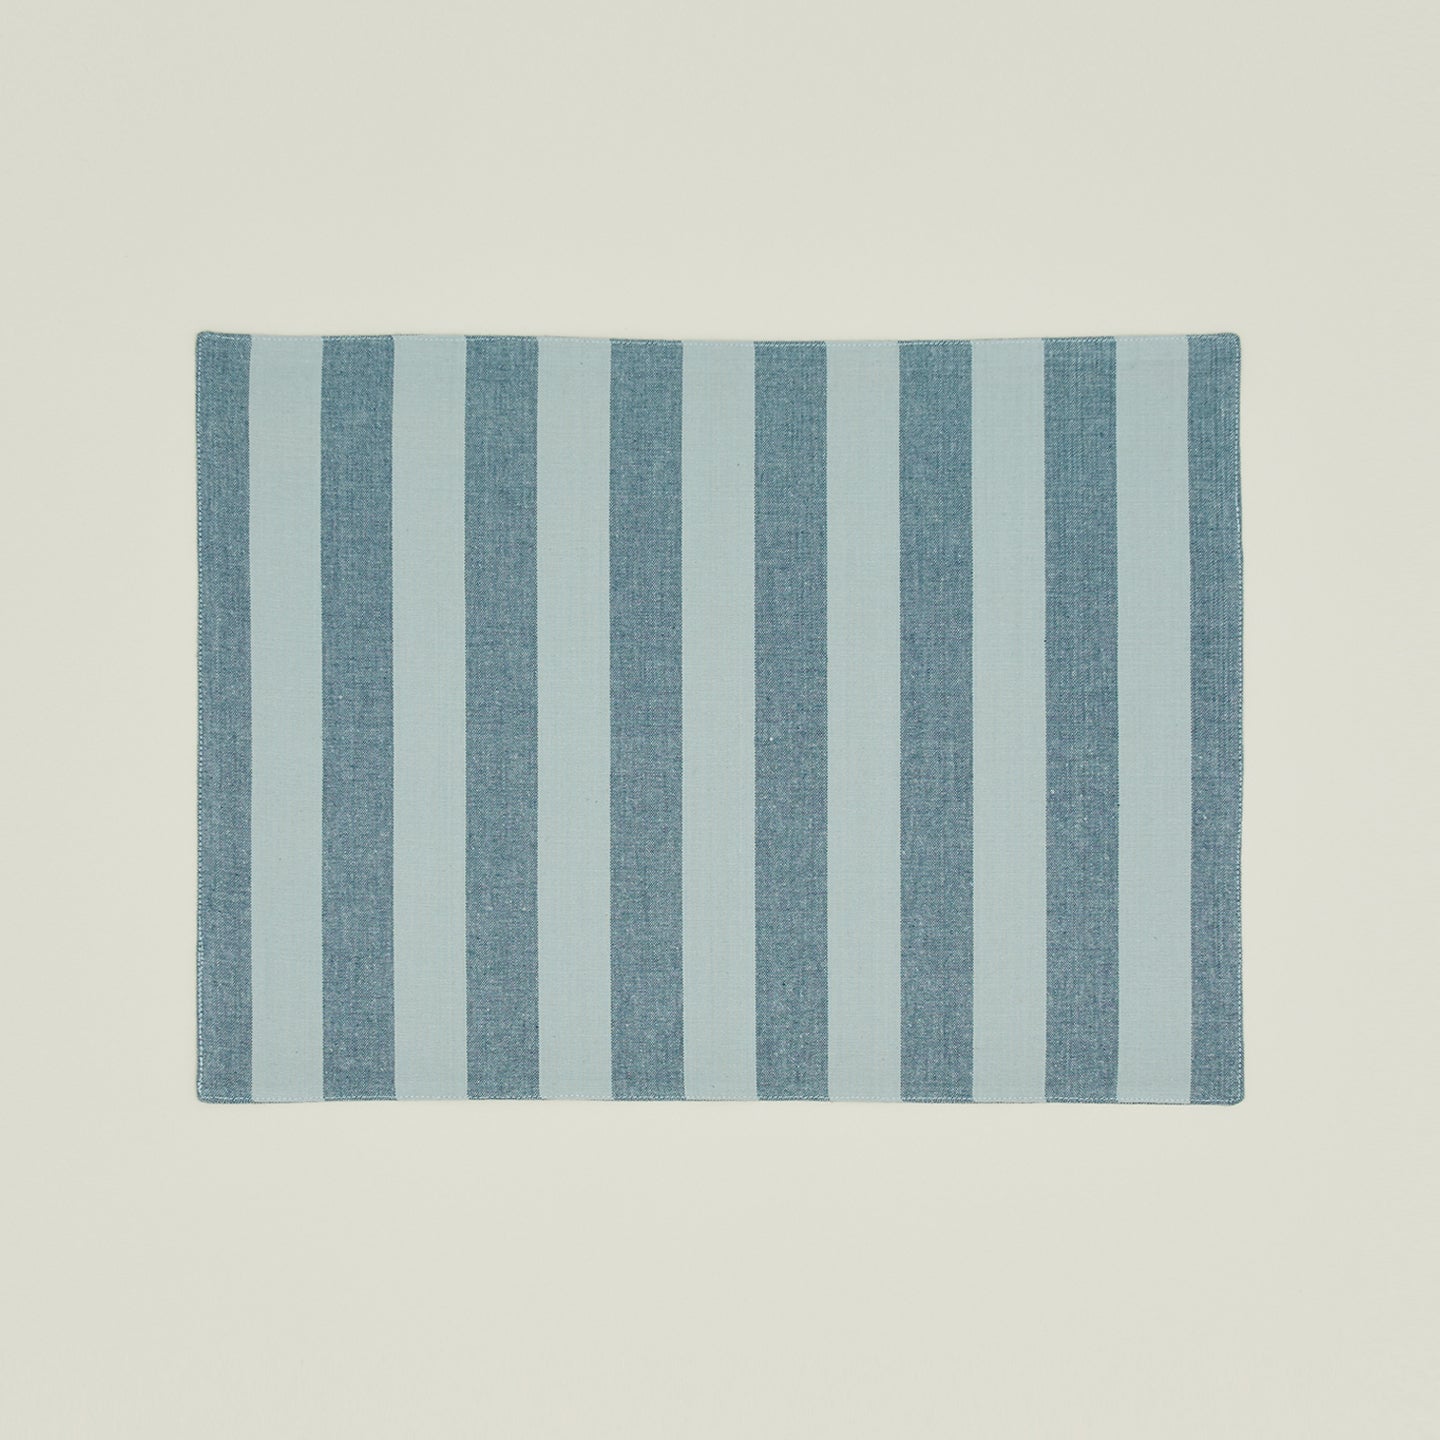 Essential Striped Placemat, Set of 4 - Sky/Peacock